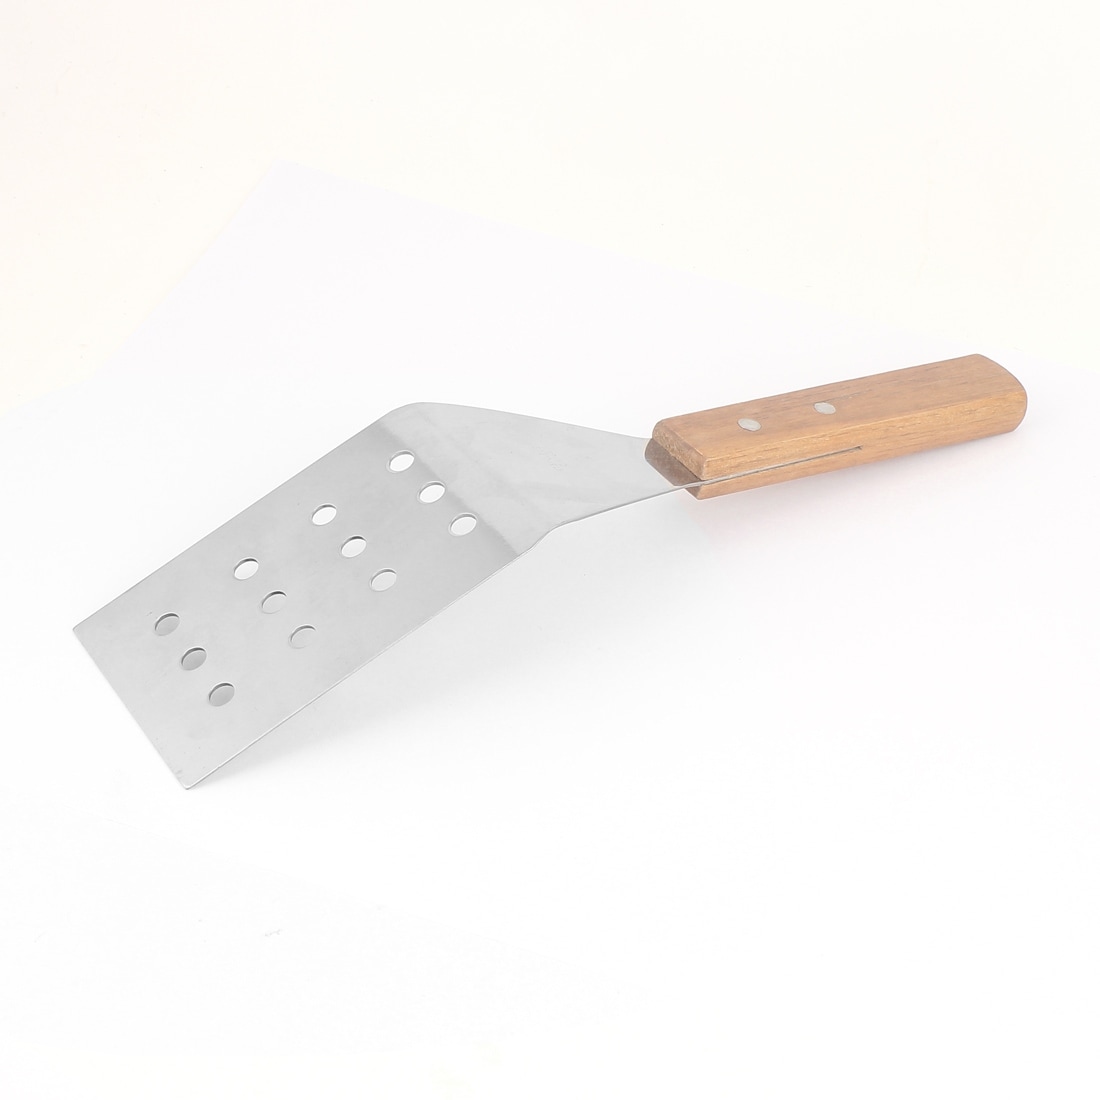 https://ak1.ostkcdn.com/images/products/is/images/direct/718a53bc2eaaa645d65c2f14f0fff4c1db7228a3/Unique-Bargains-Kitchen-Tool-Rectangle-Perforated-Blade-Wooden-Handle-Food-Turner-Scraper.jpg